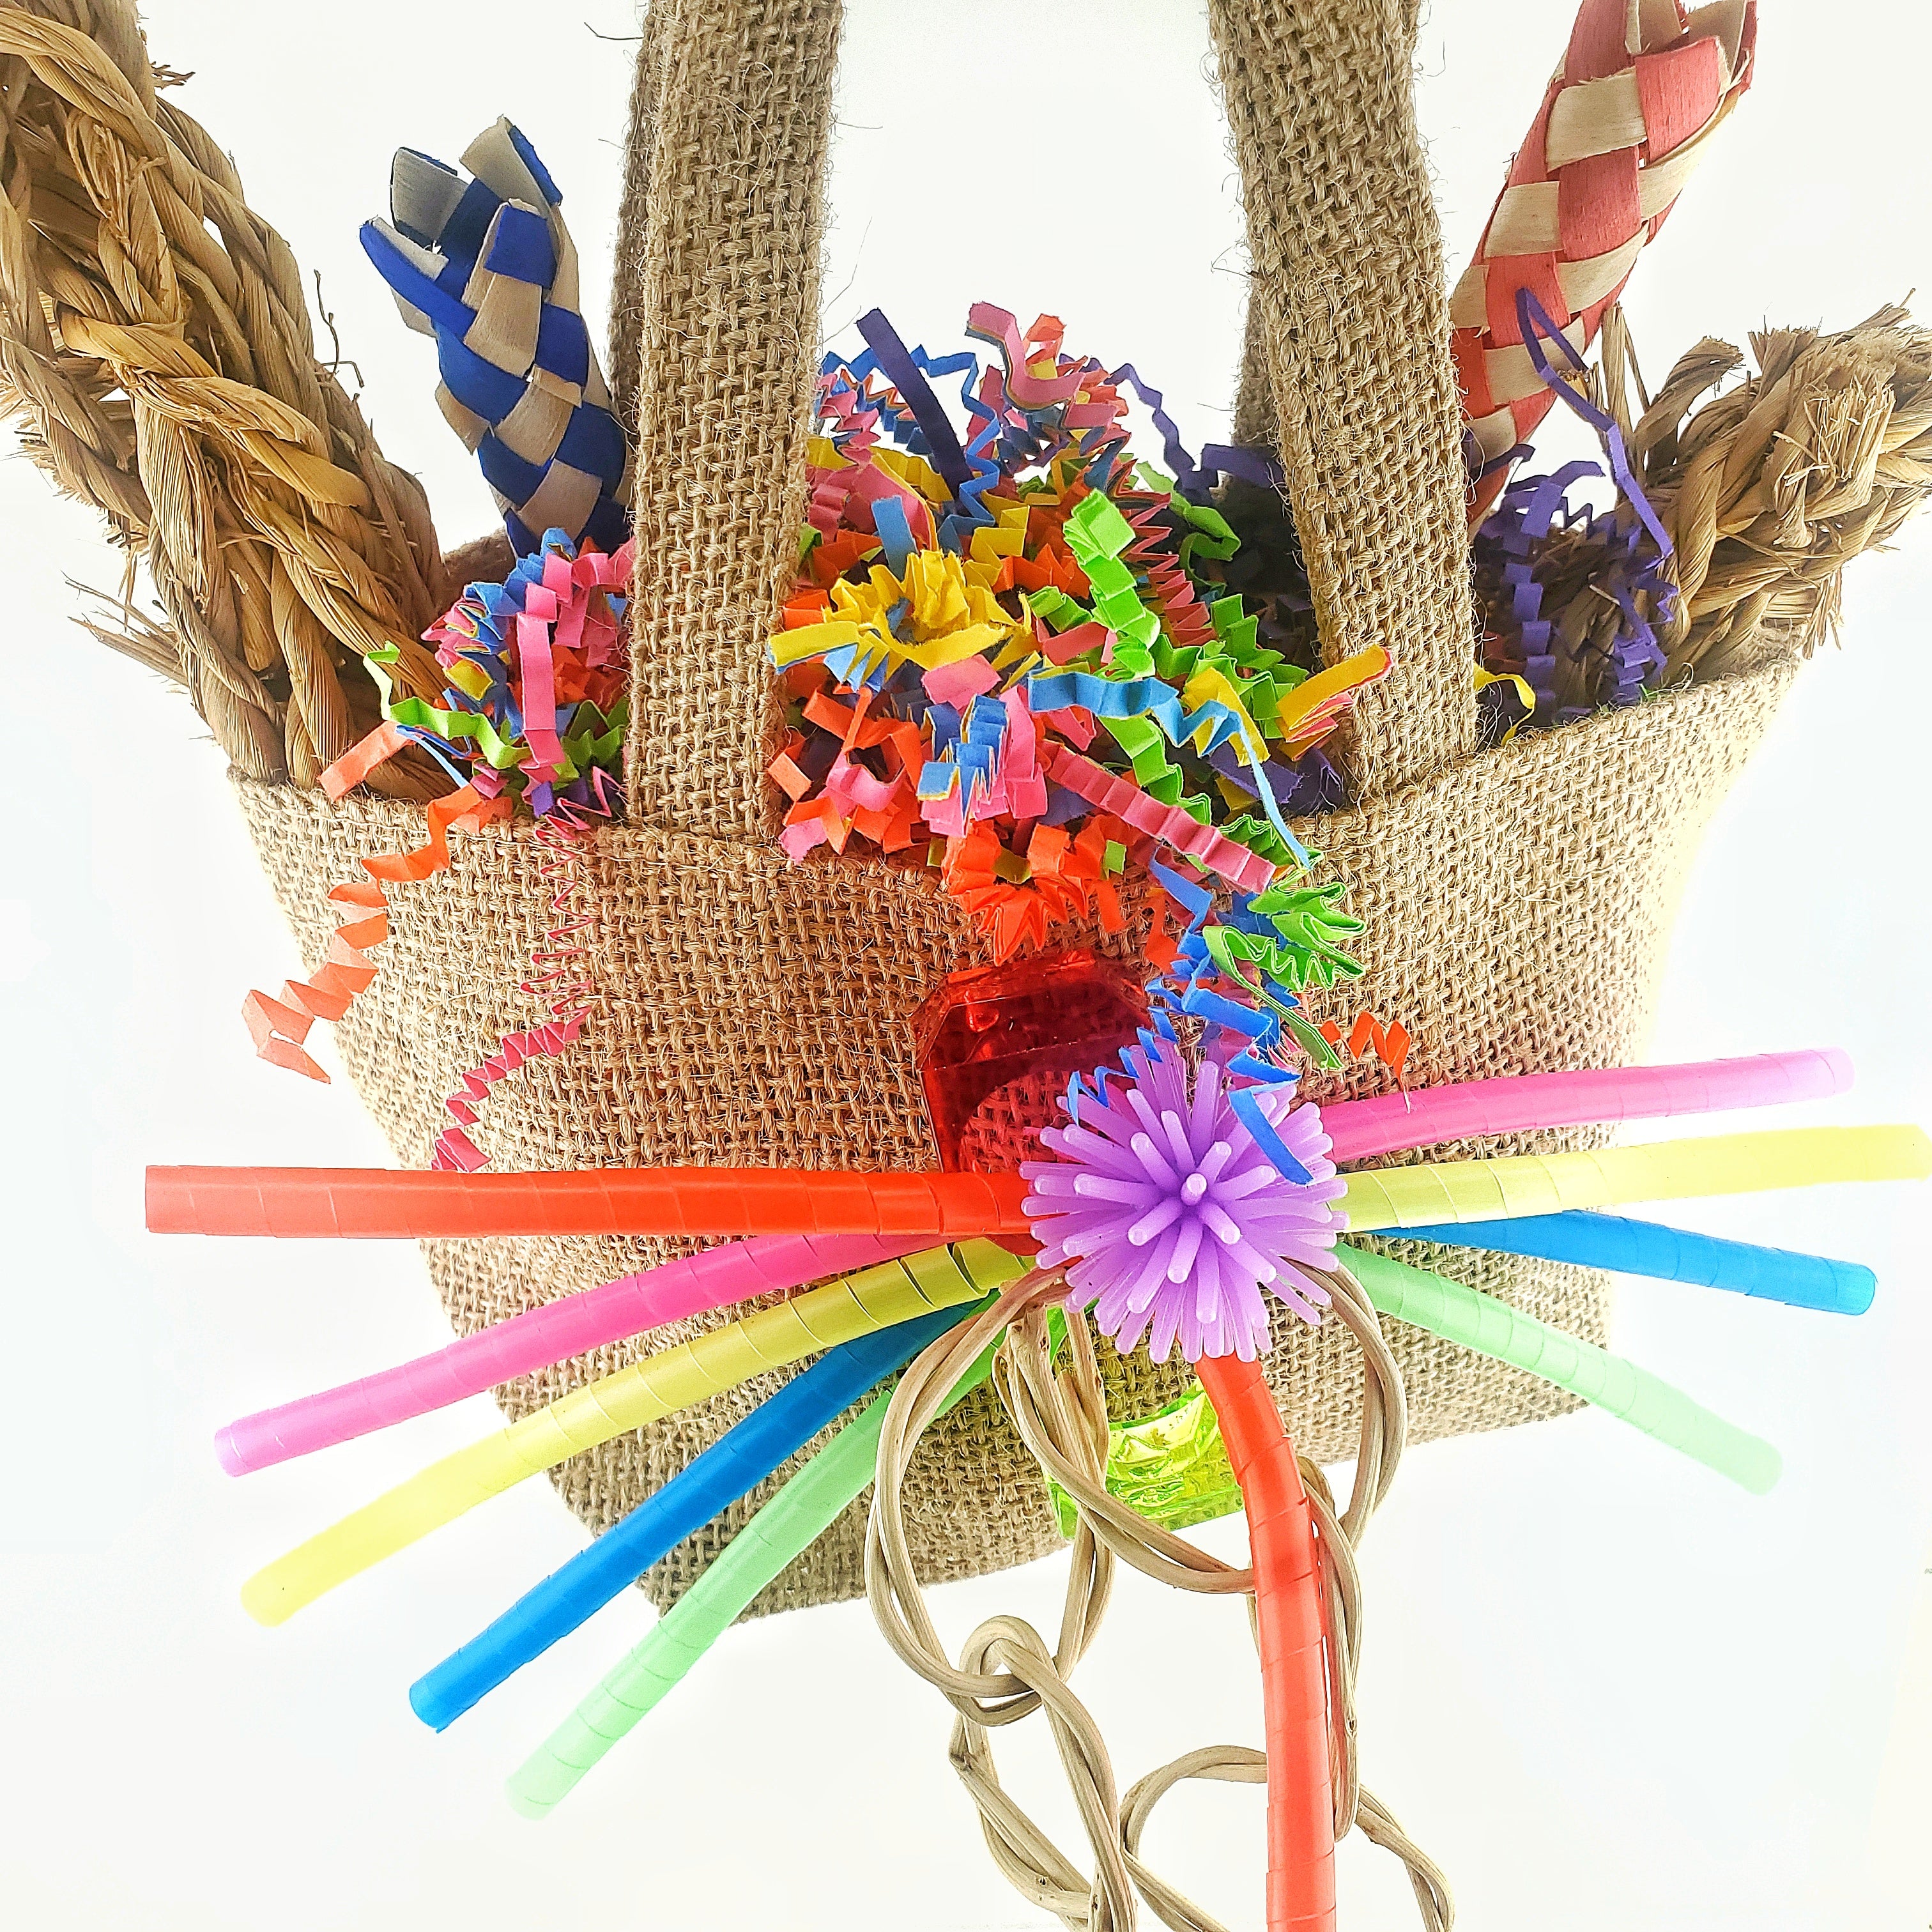 Foraging Treasure Tote by Cheep Thrills Bird Toys